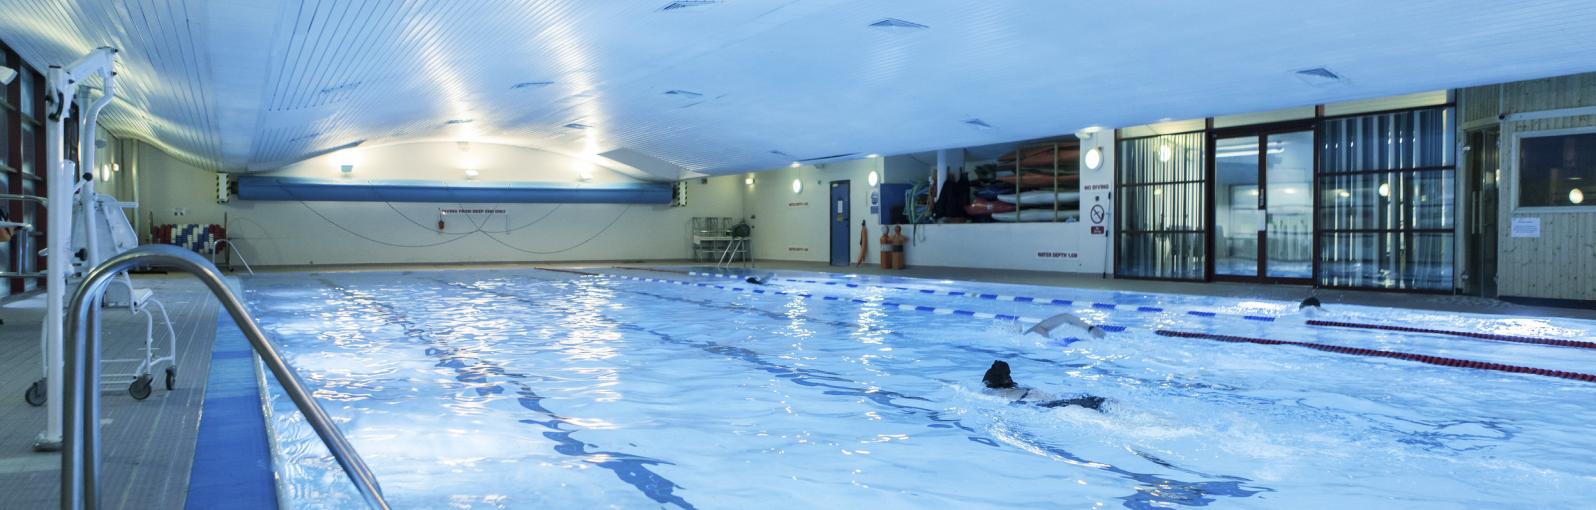 Swimming pool within the Sports Centre